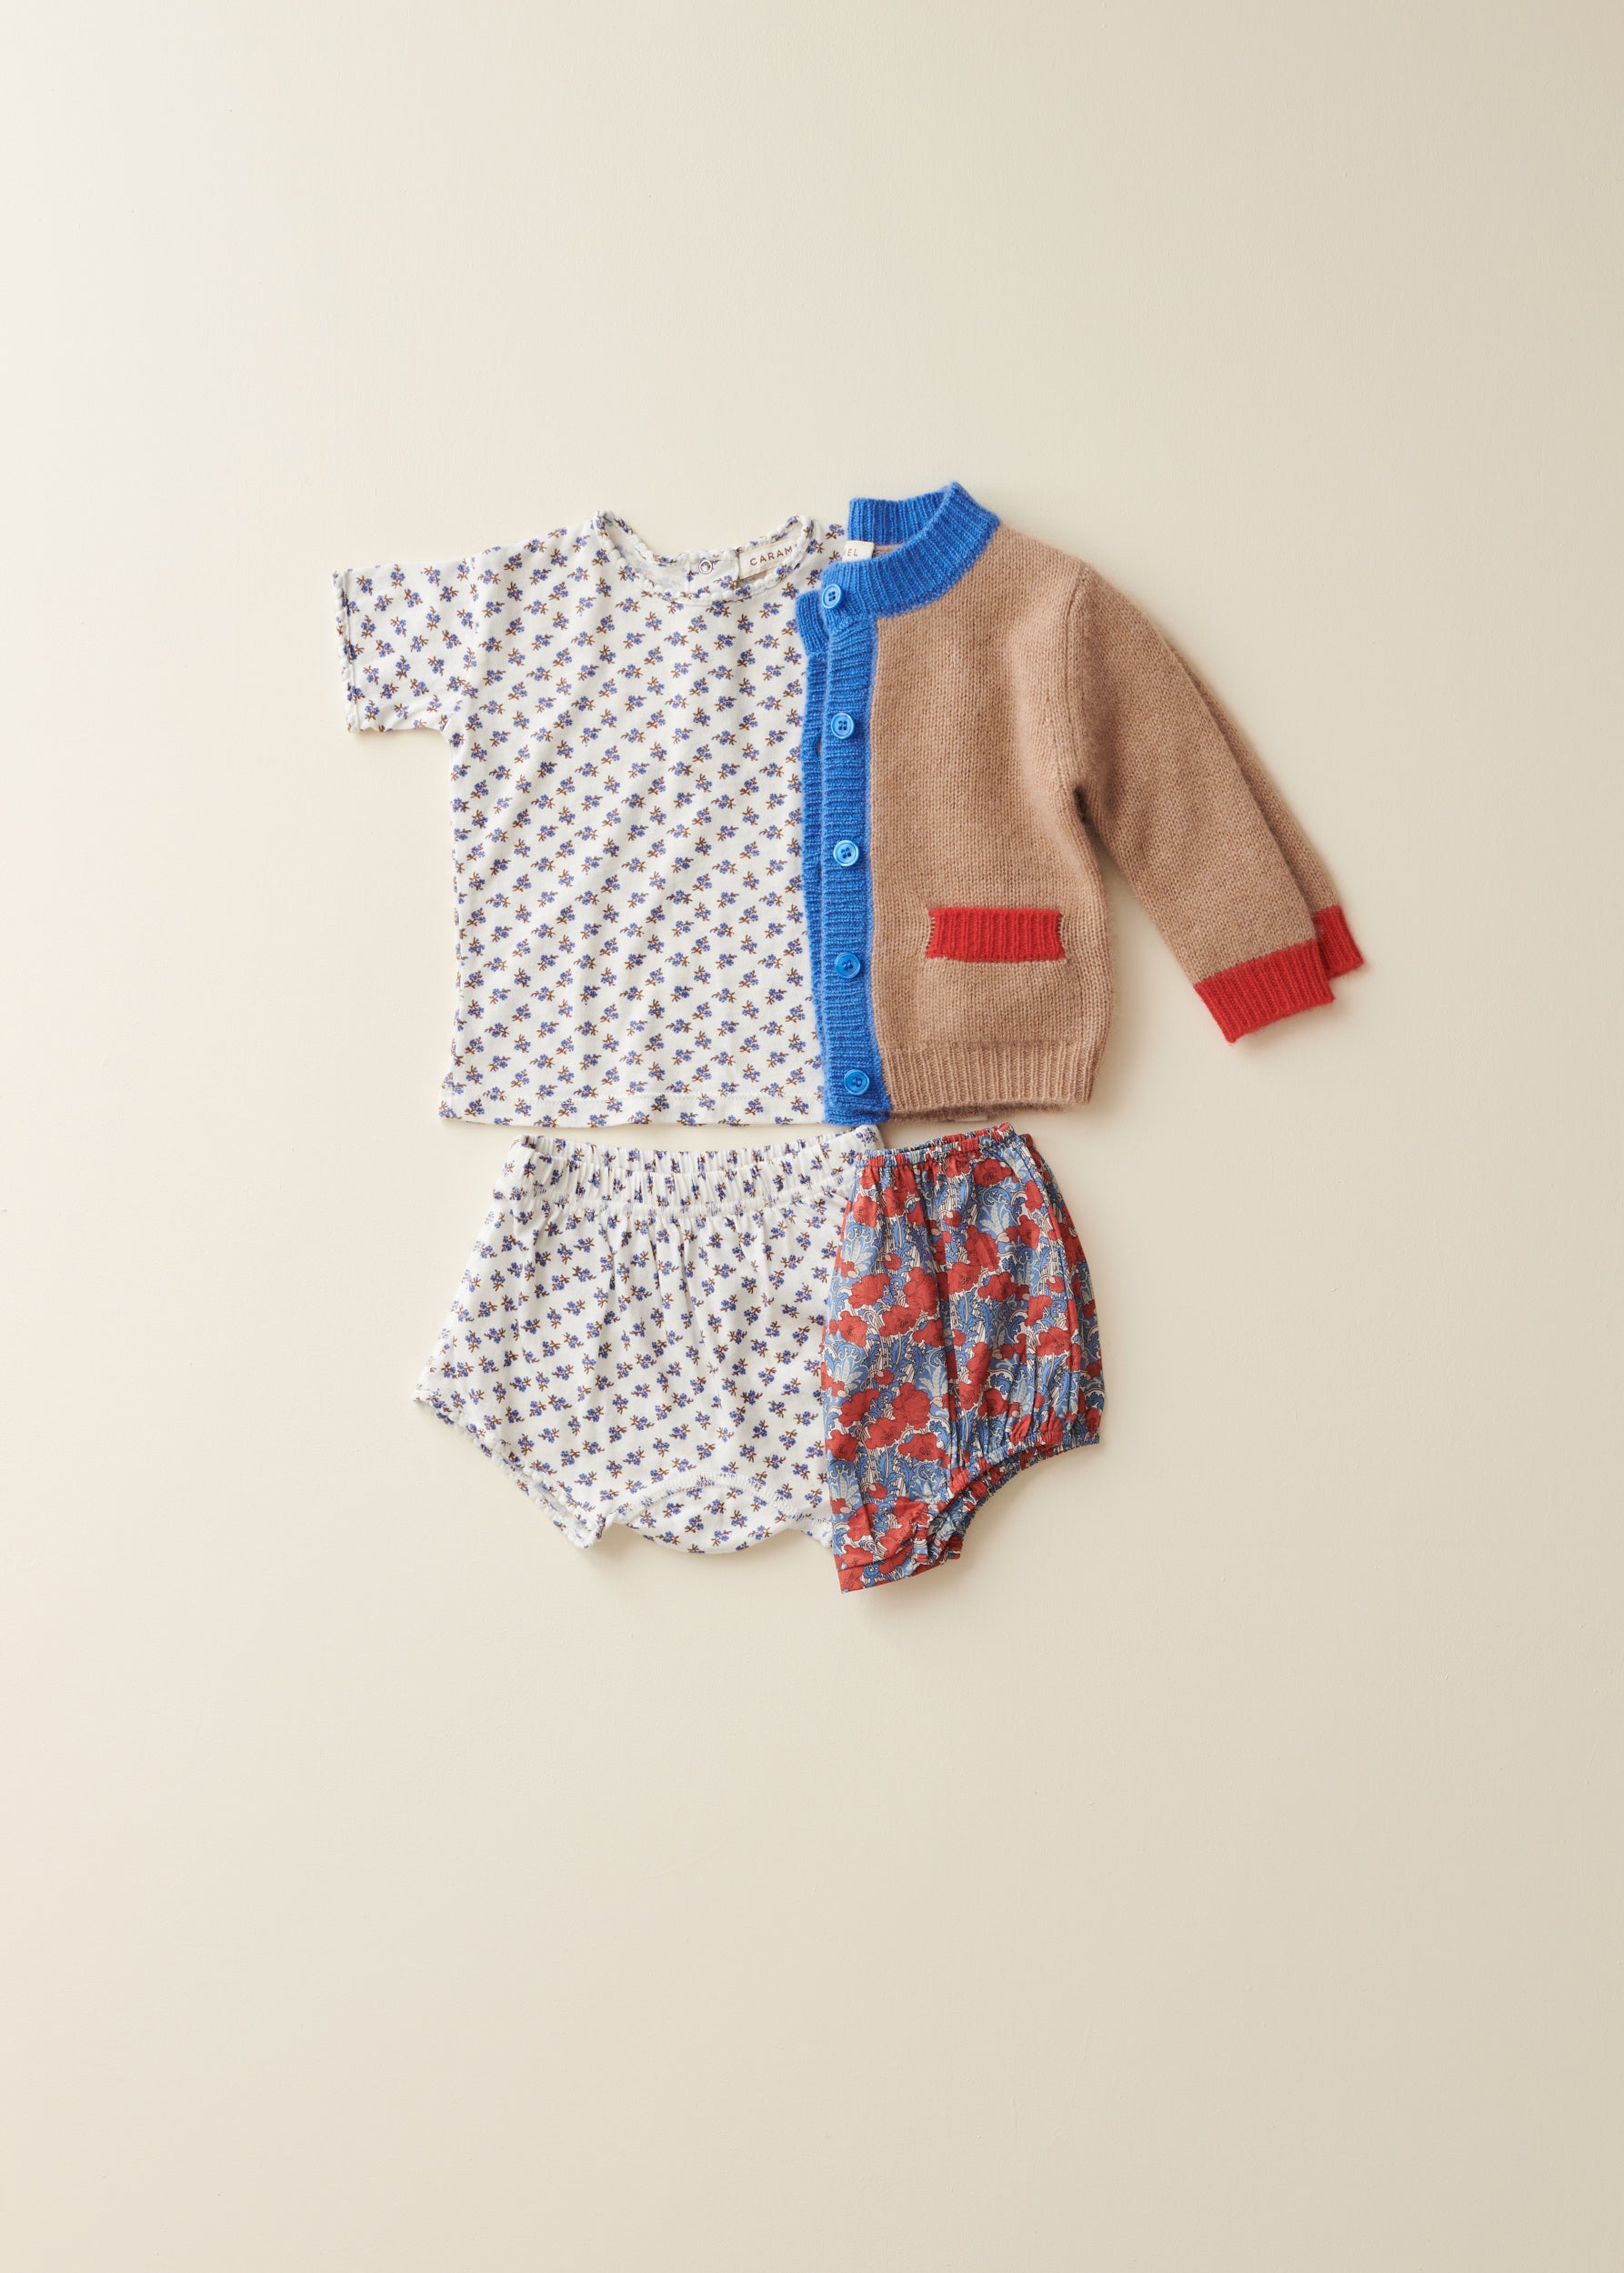 LOTUS BABY BLOOMERS - BLUE/RED